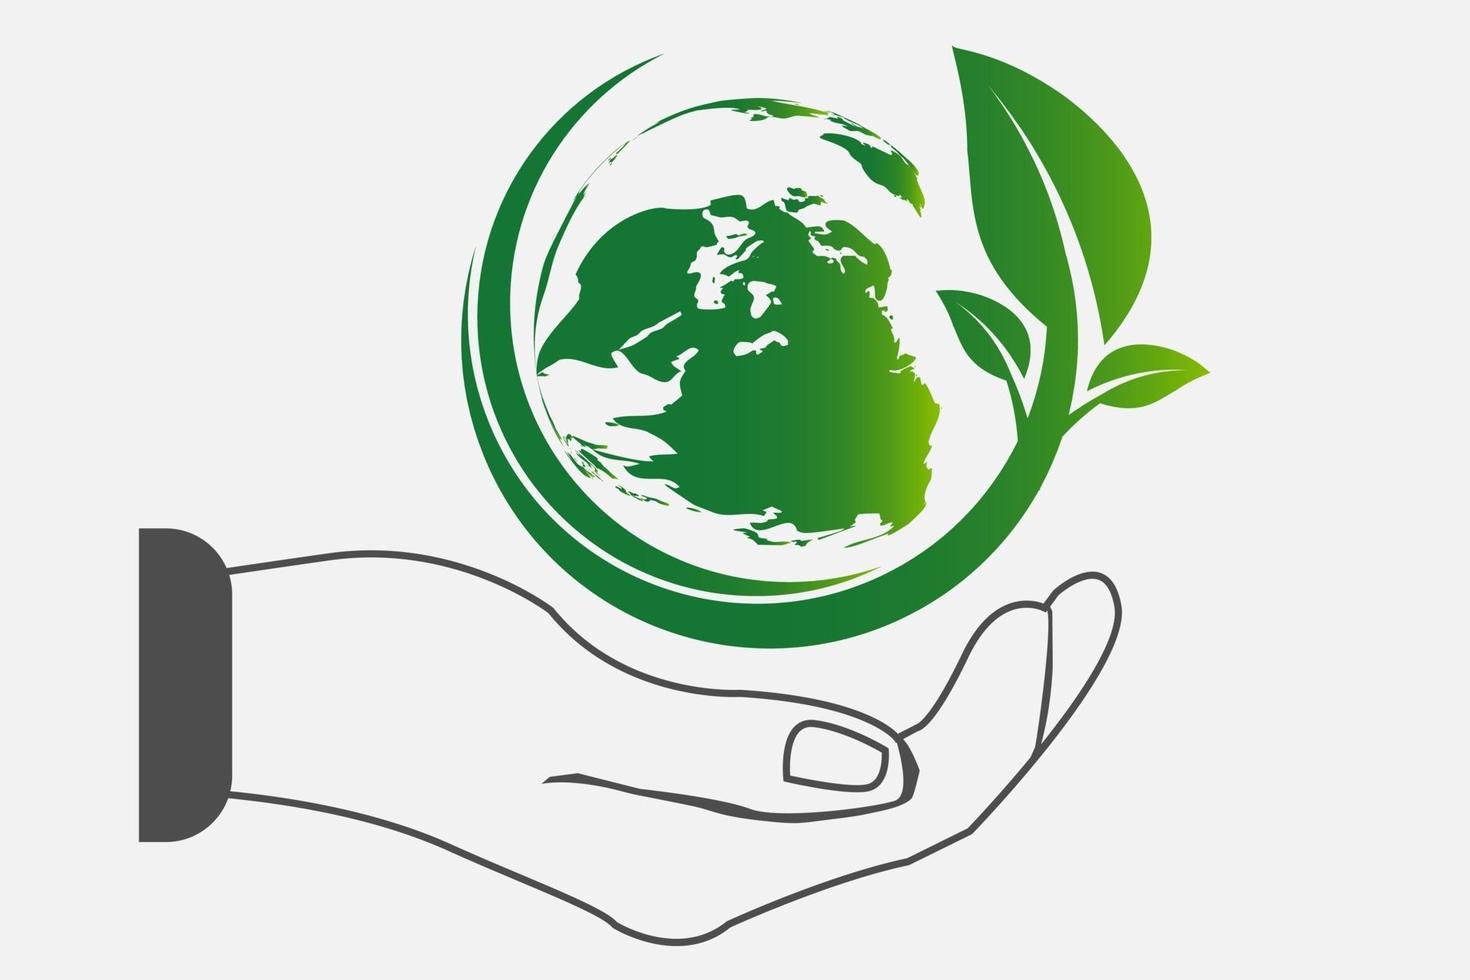 The world in your hands ecology concept Green cities help the world with eco friendly concept idea with globe and tree background vector